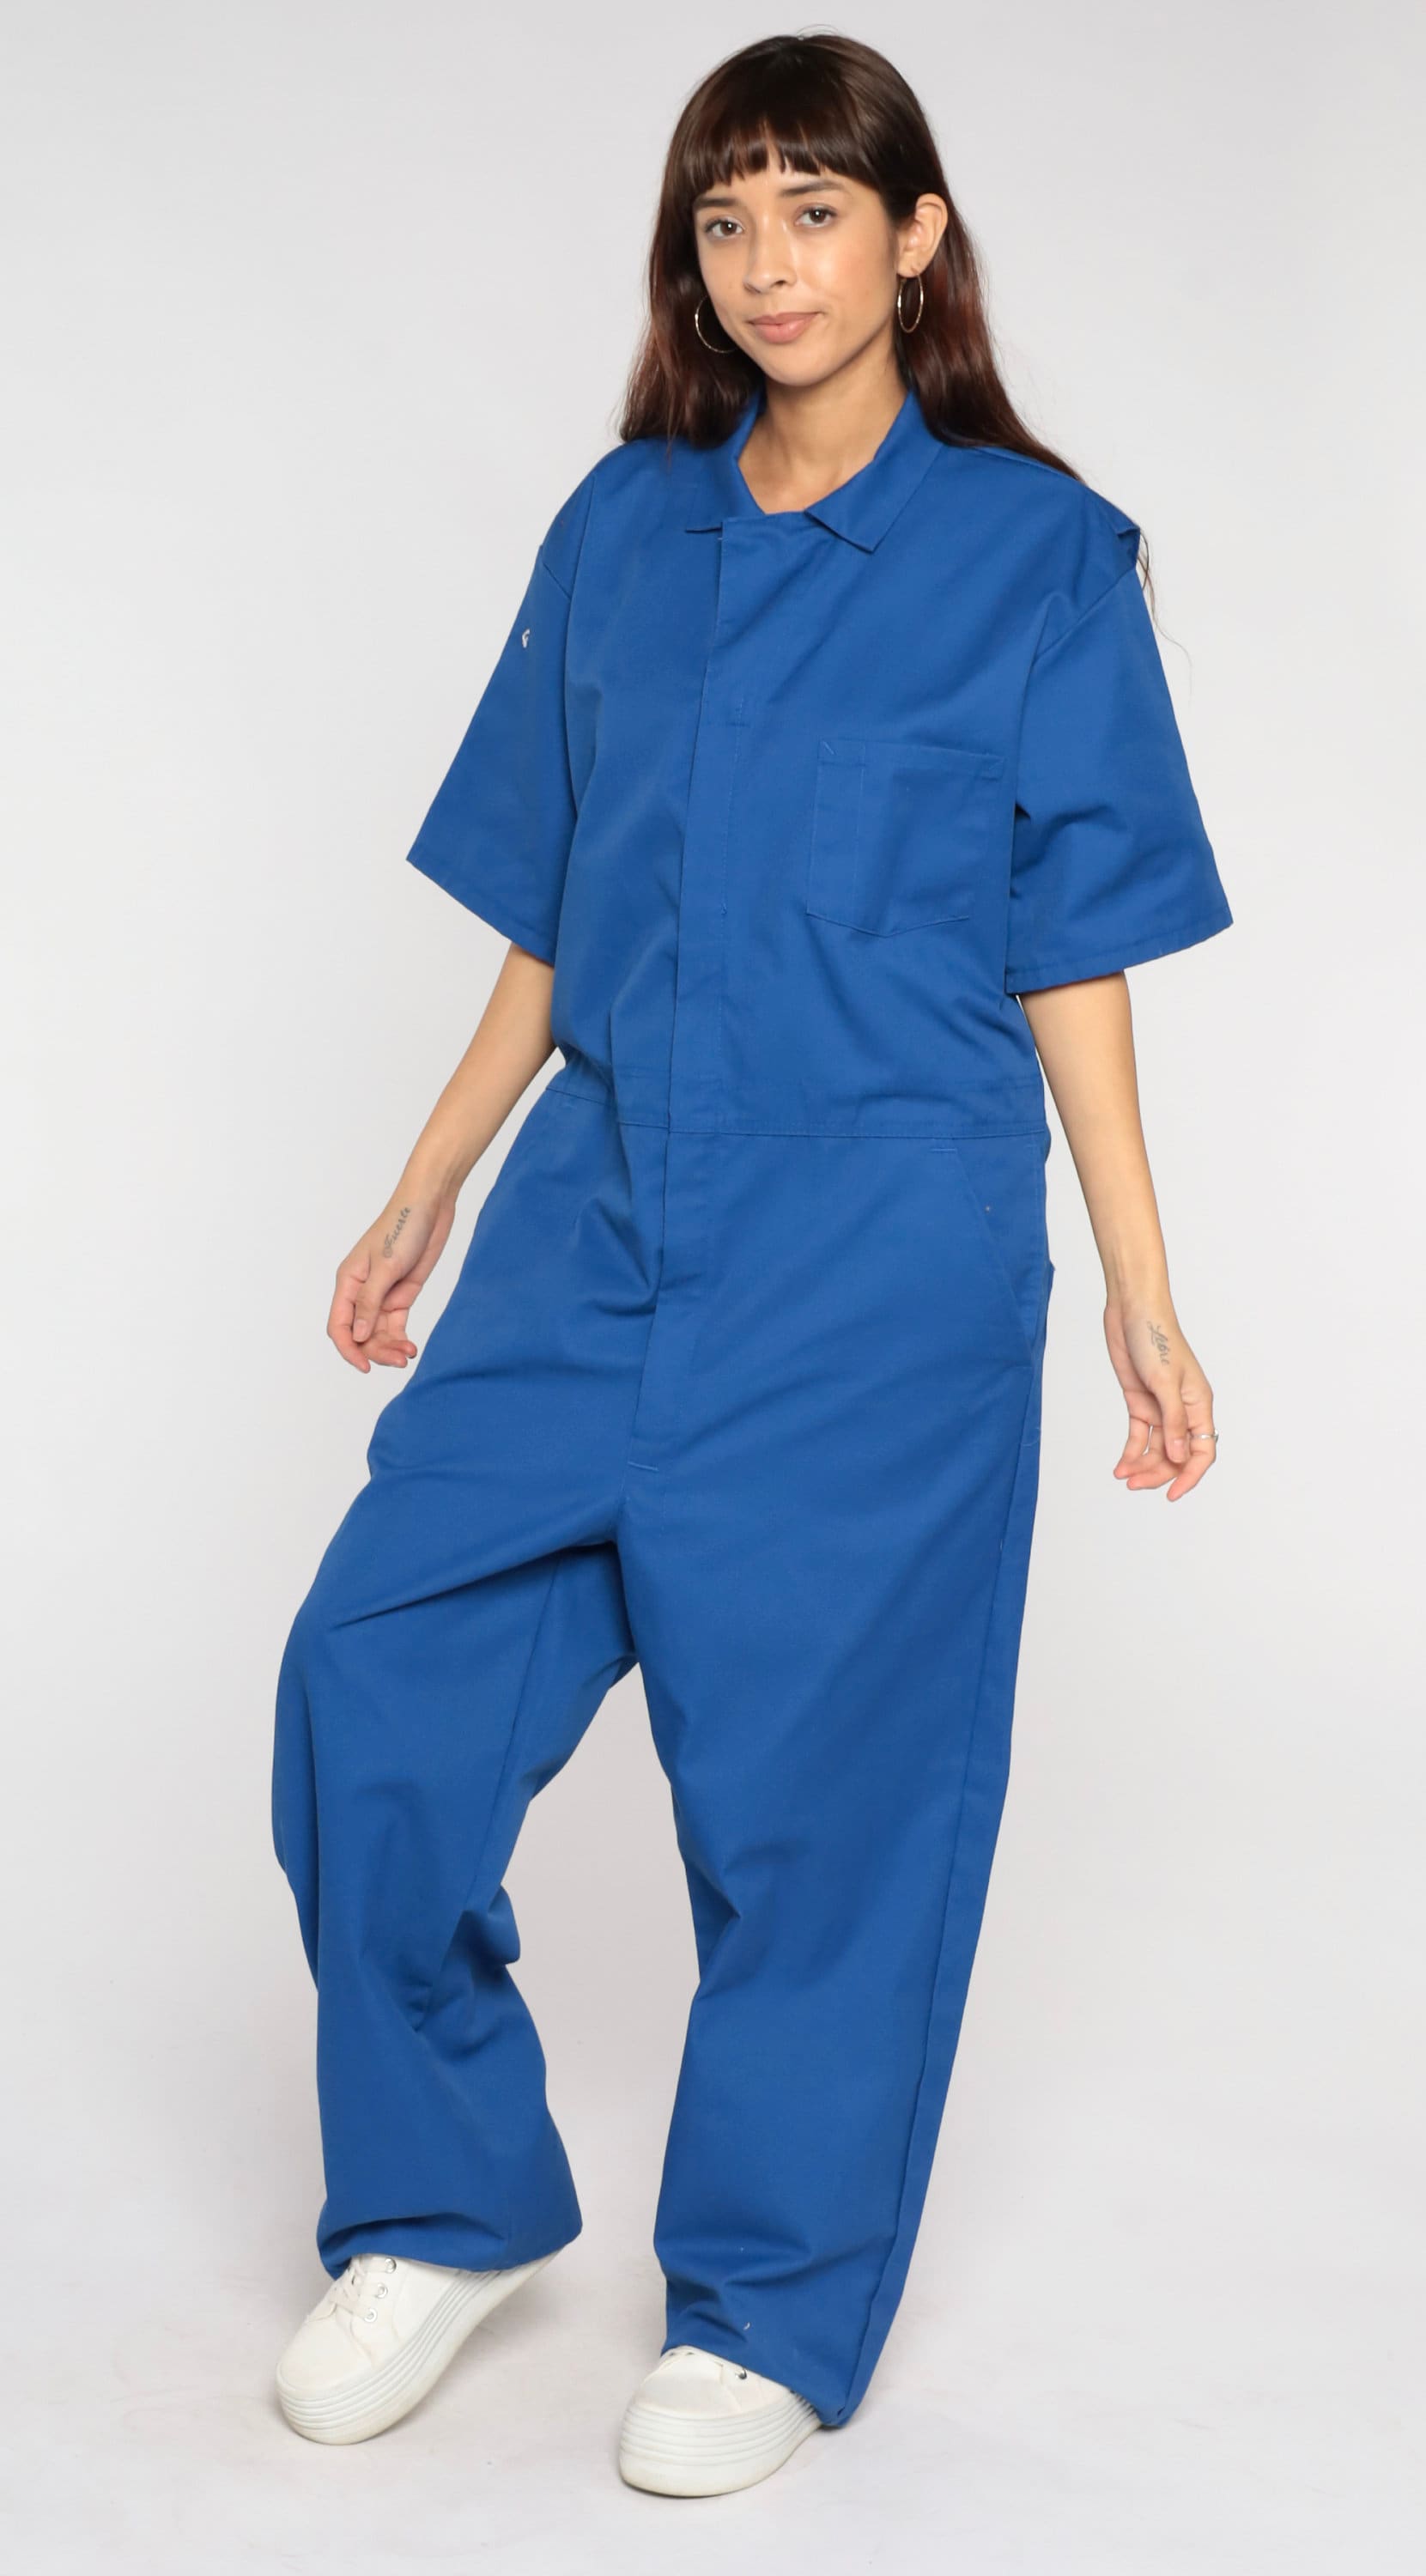 Blue Jumpsuit 90s Coveralls Retro Workwear Pants Boiler - Etsy Norway